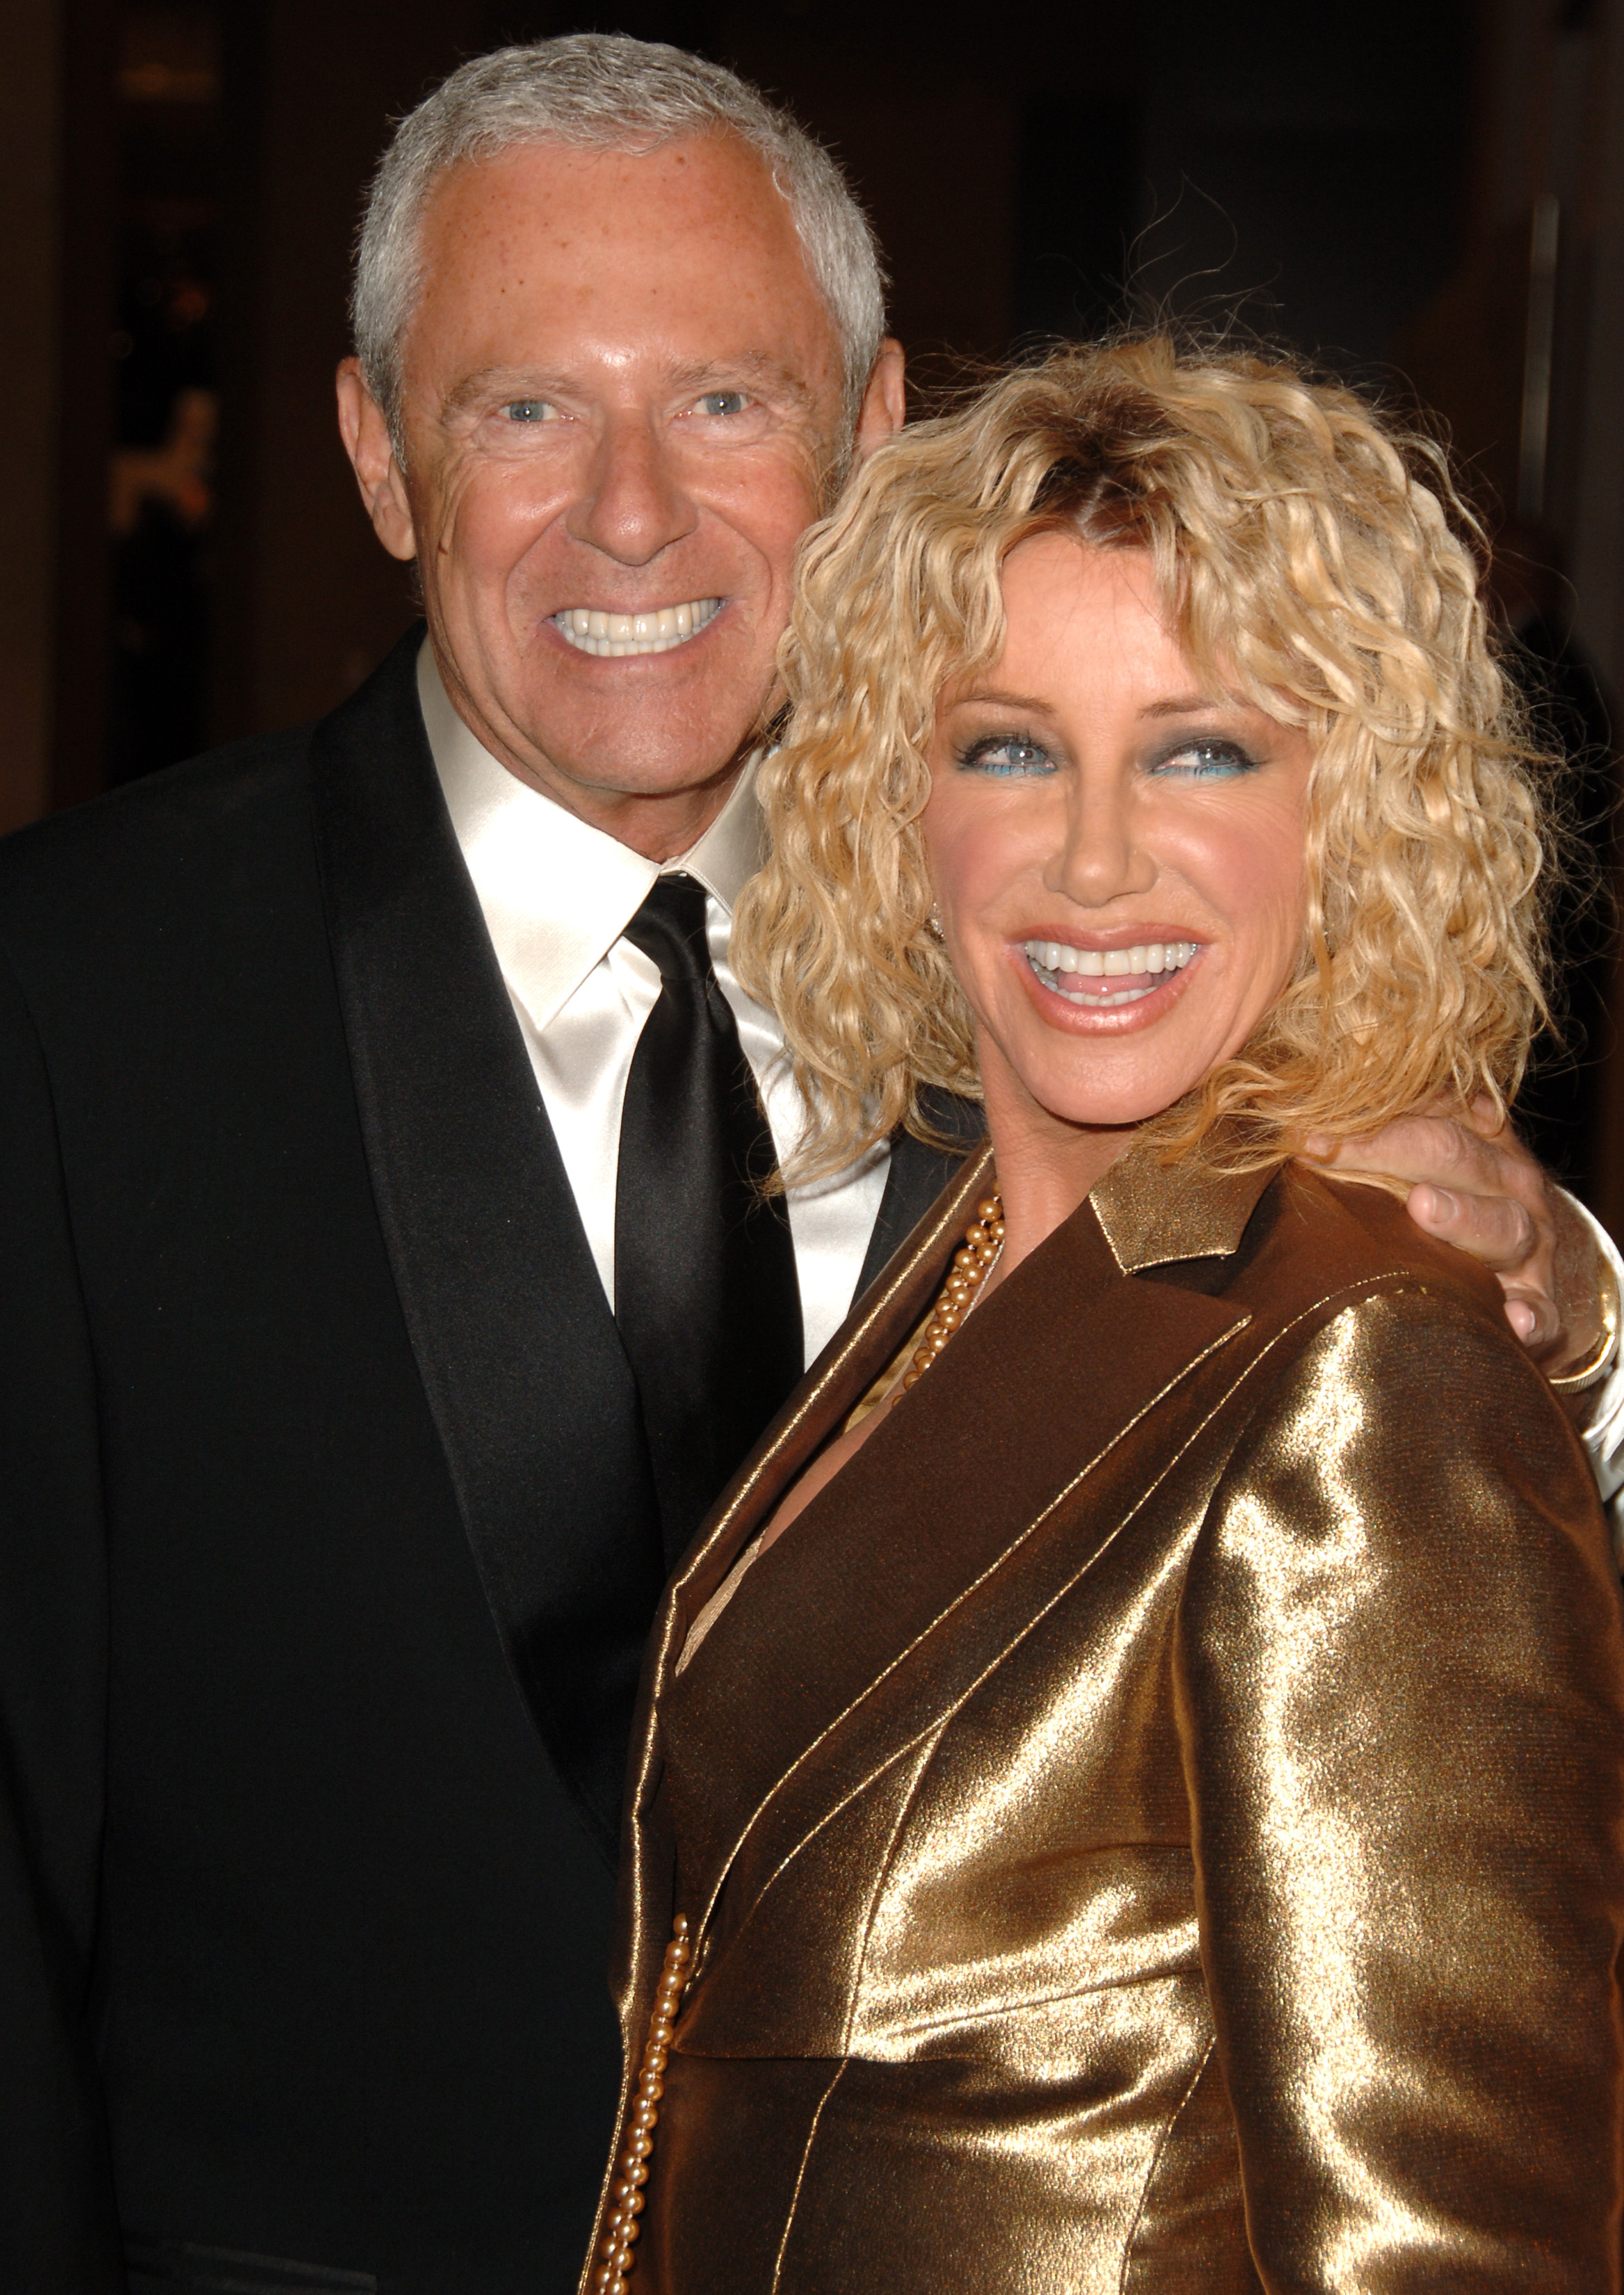 Alan Hamel et Suzanne Somers au Mercedes-Benz Presents the 17th Carousel of Hope Ball | Source : Getty Images